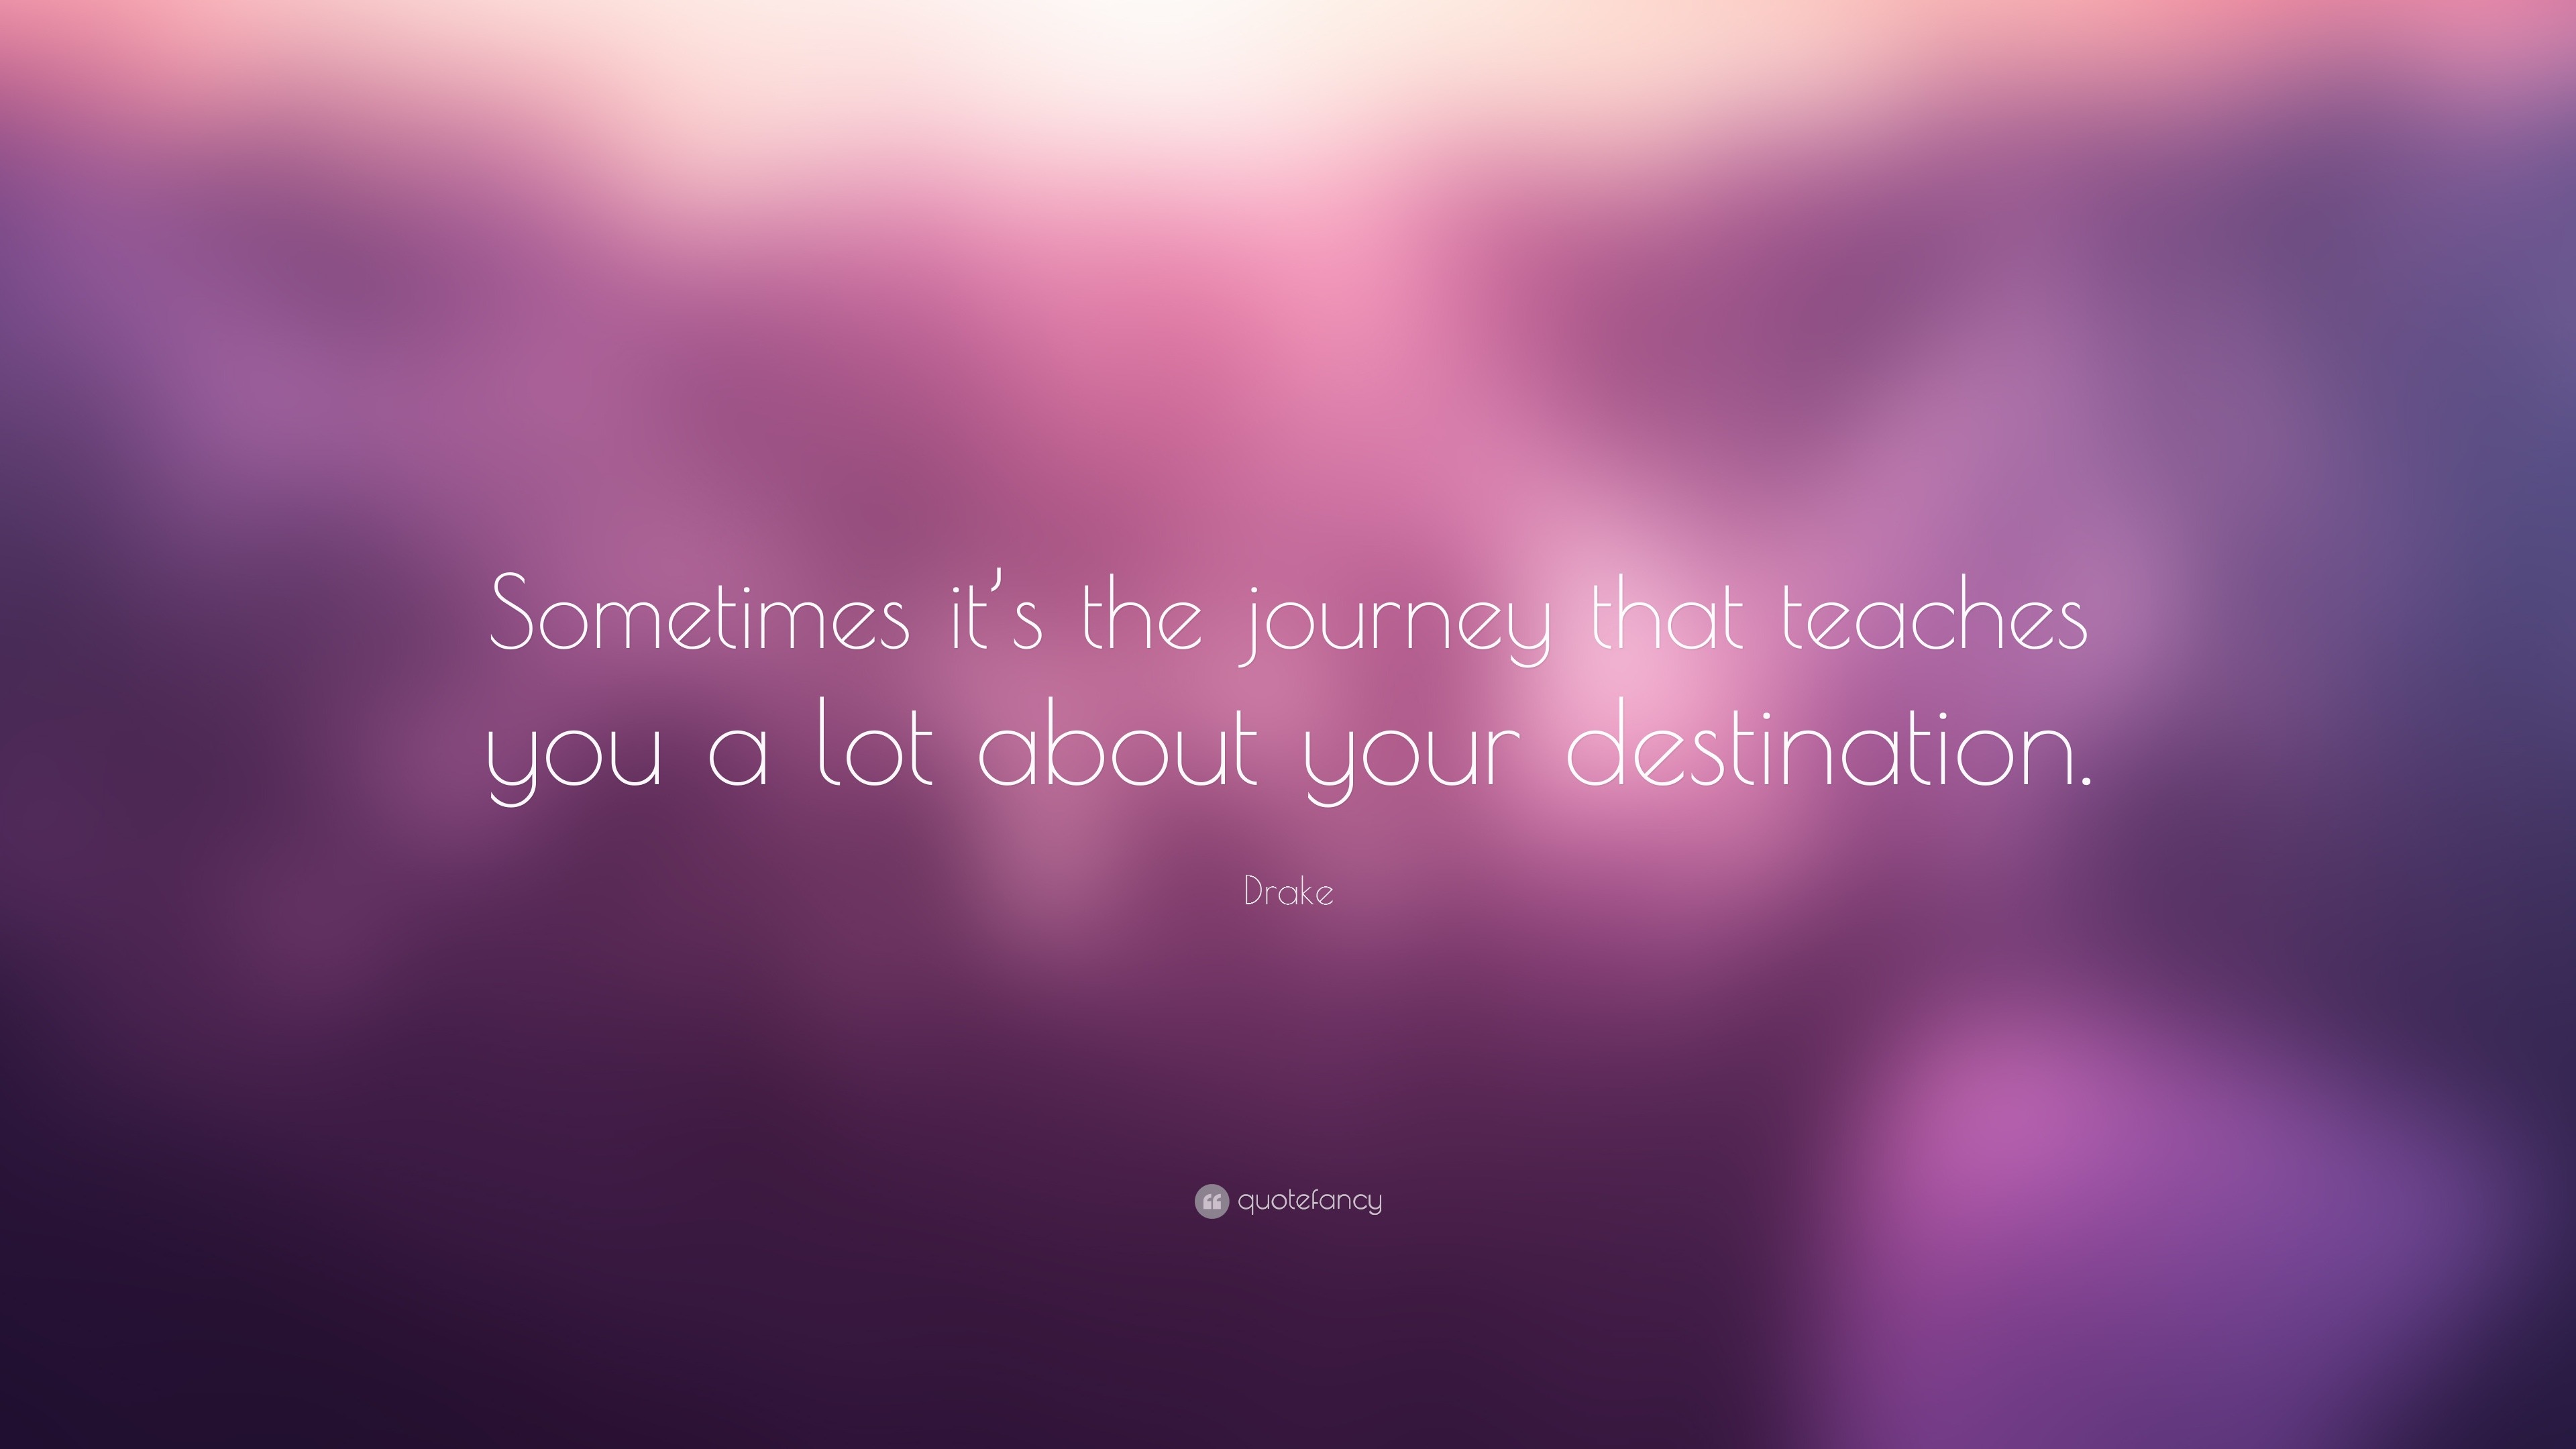 Drake Quote: “Sometimes it’s the journey that teaches you a lot about ...